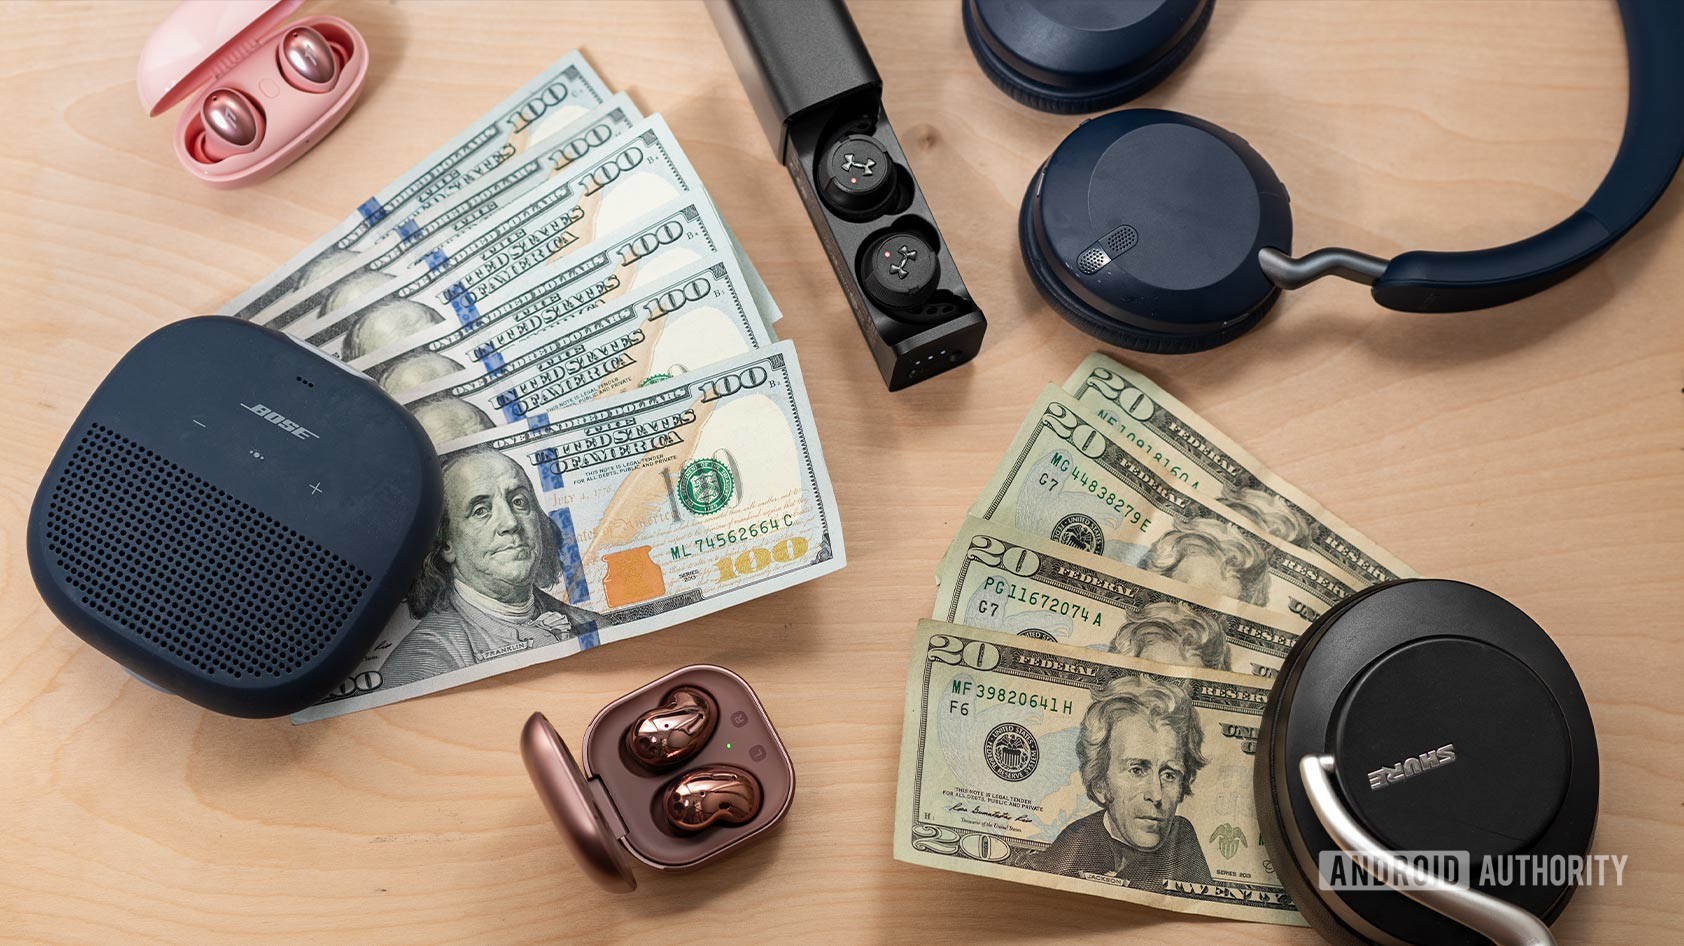 An image of money surrounded by wireless audio products like the Bose SoundLink Micro speaker, Samsung Galaxy Buds Live, 1MORE Colorbuds, Jabra Elite 45h, JBL True Wireless Flash X, and Shure AONIC 50.